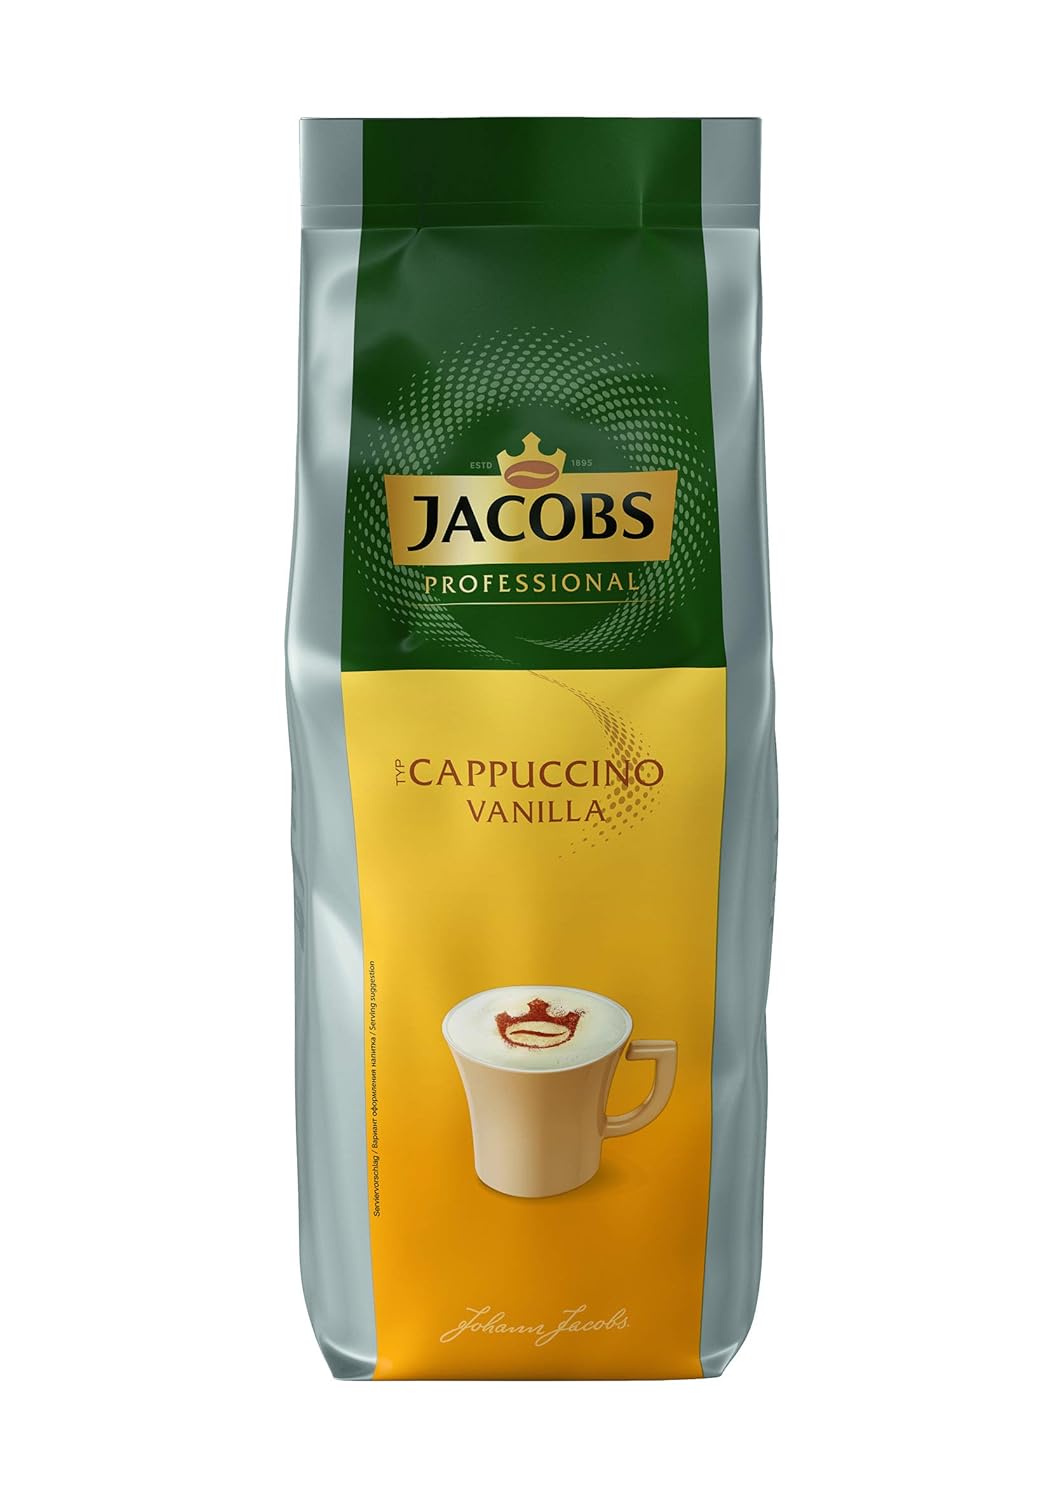 Jacobs Professional Cappuccino Vanilla, Instant Coffee 1 kg, Soluble Coffee with Fine Vanilla Note